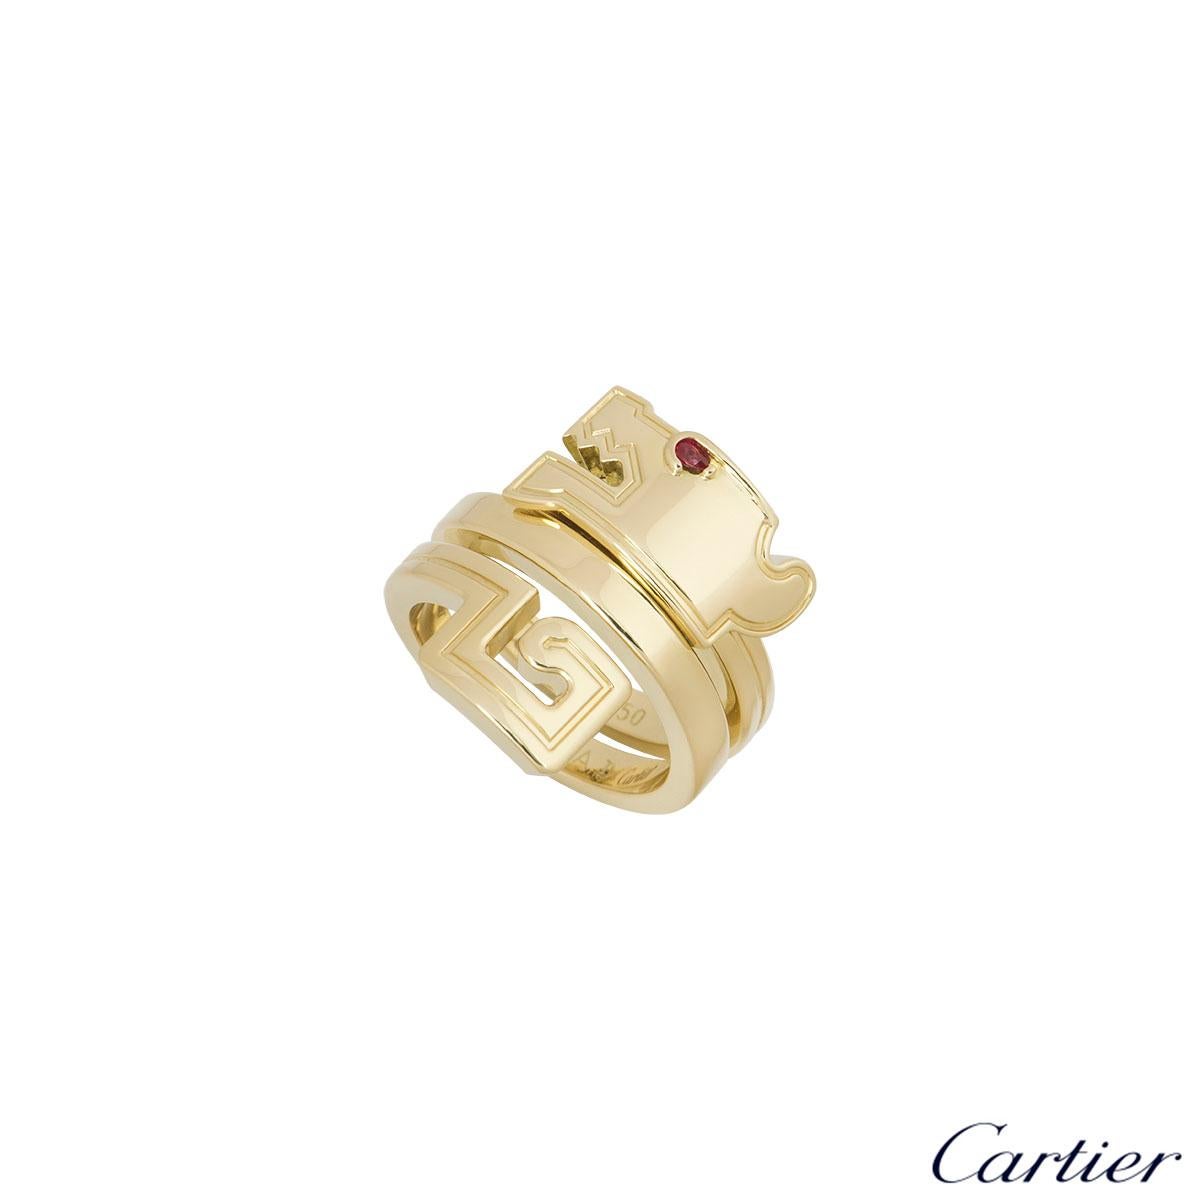 A stunning 18k yellow gold Cartier ring from the Le Baiser Du Dragon collection. The ring features a dragon head with a ruby eye on one end which wraps round the finger and ends with the tail. The ring is a size UK M, EU 52 and US 6 with a gross